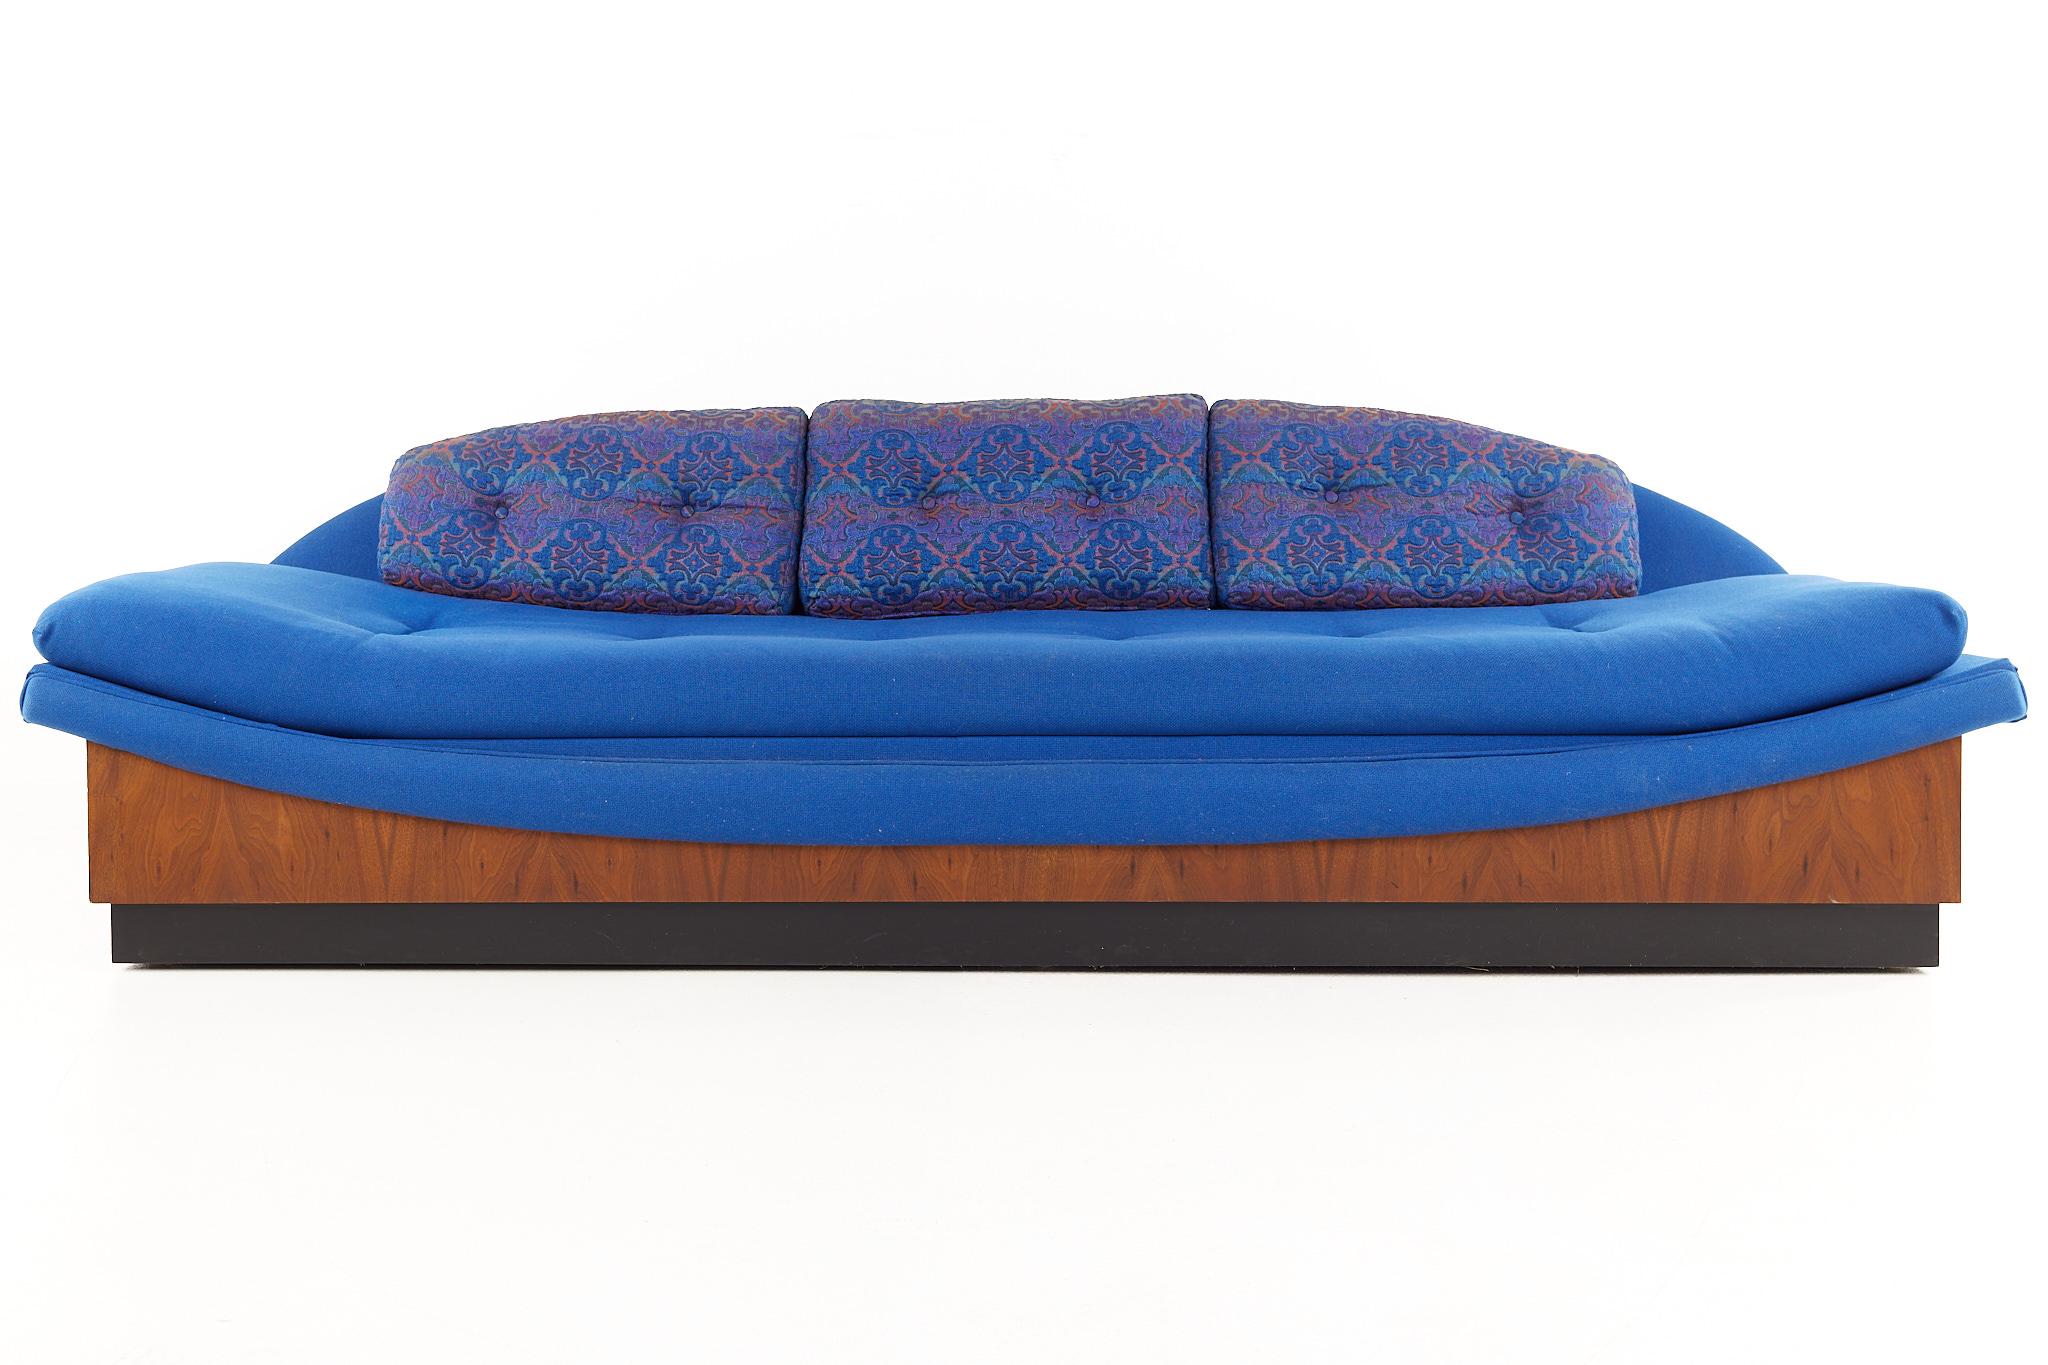 Adrian Pearsall for Craft Associates mid-century blue plinth base walnut gondola sofa

This sofa measures: 102.25 wide x 33 deep x 29 inches high, with a seat height of 19.25 inches

All pieces of furniture can be had in what we call restored